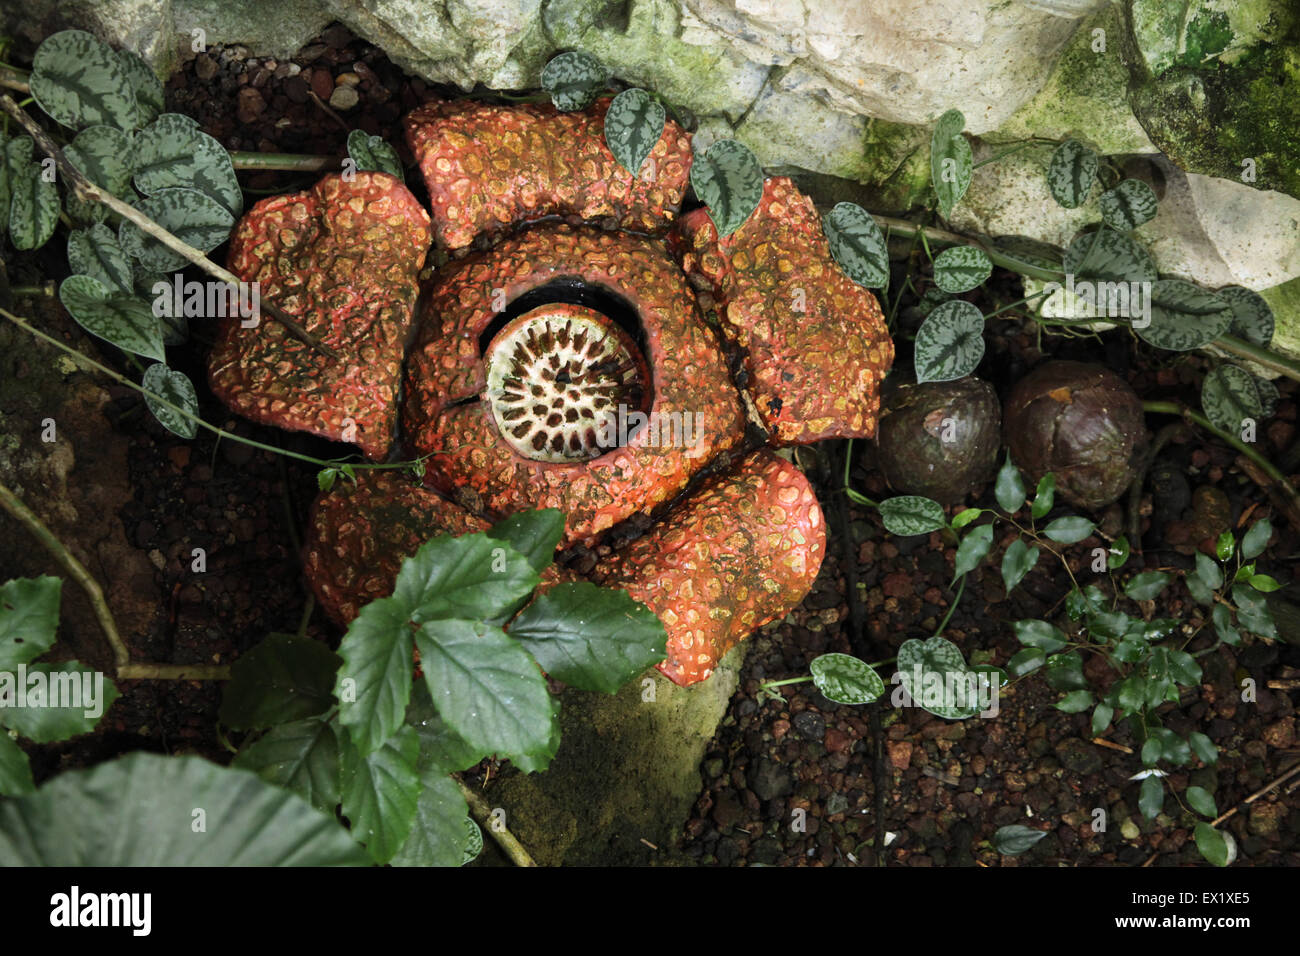 Rafflesia The Biggest Flower In The World With Rotting Meat Smell At Schonbrunn Zoo In Vienna Austria Stock Photo Alamy